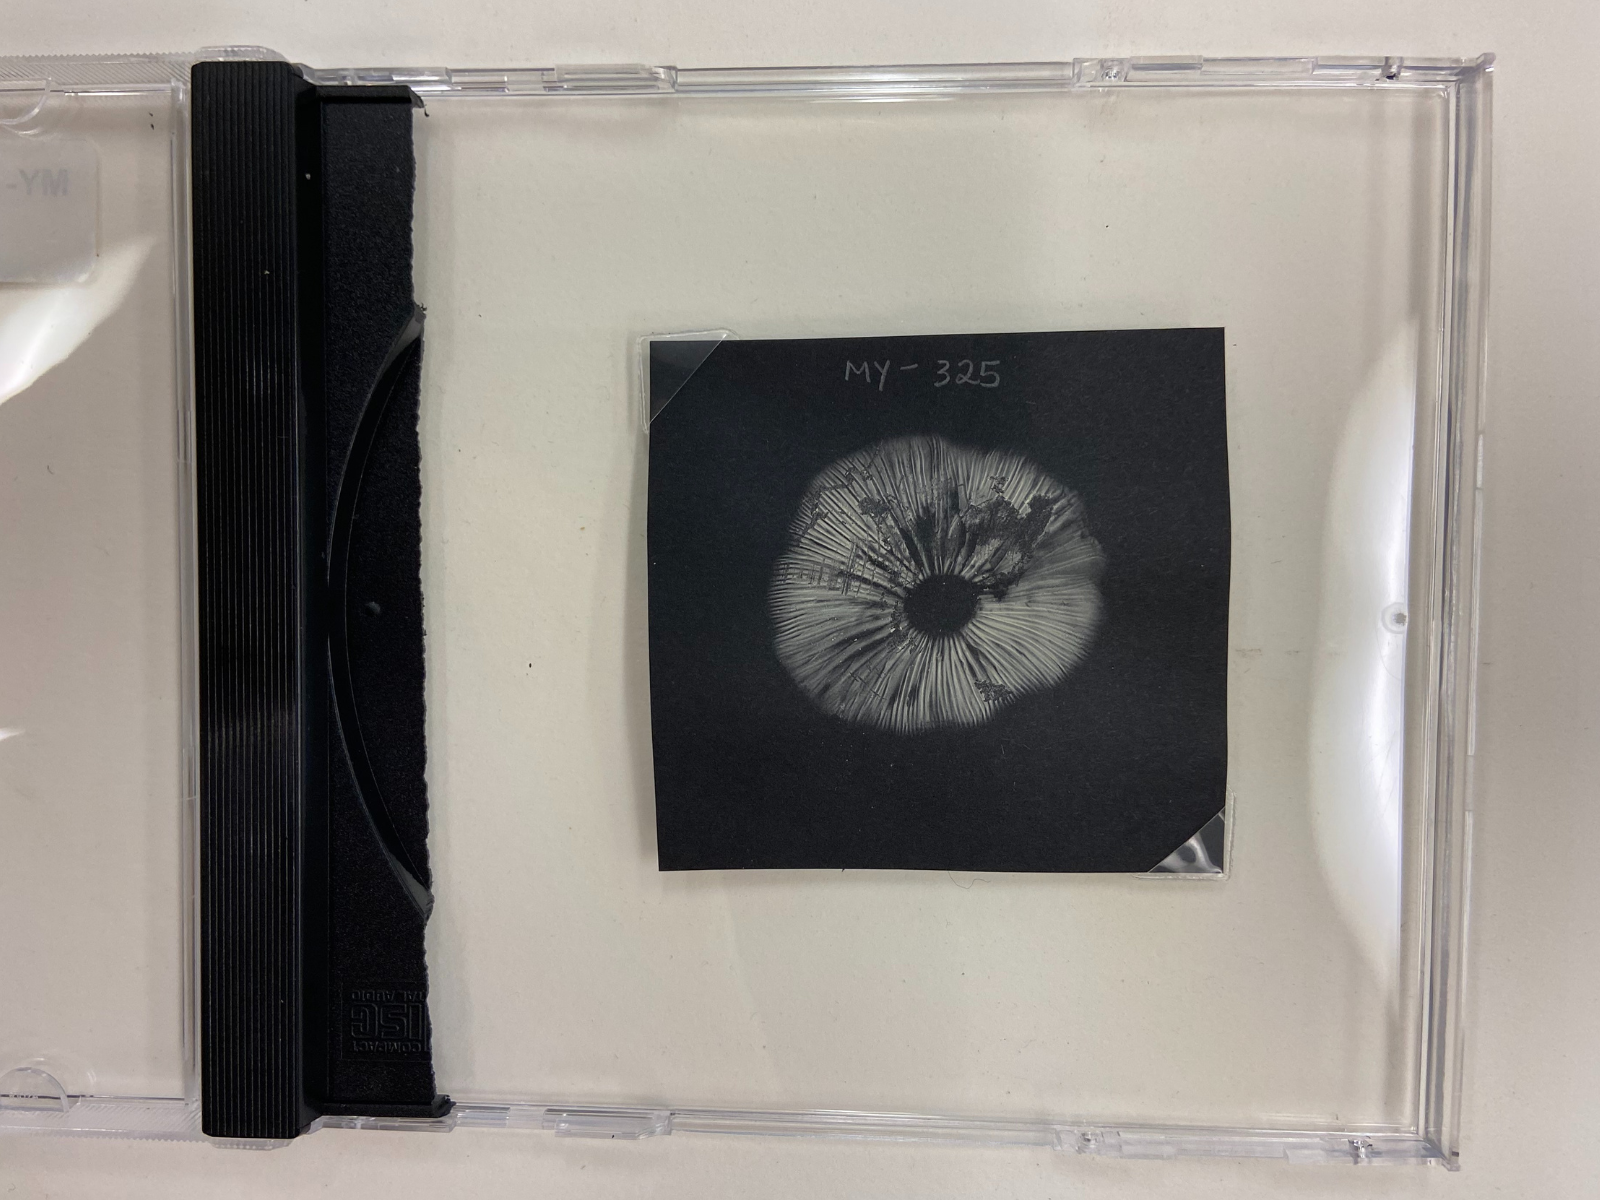 A white fungal spore placed on a square of black paper inside a CD case.